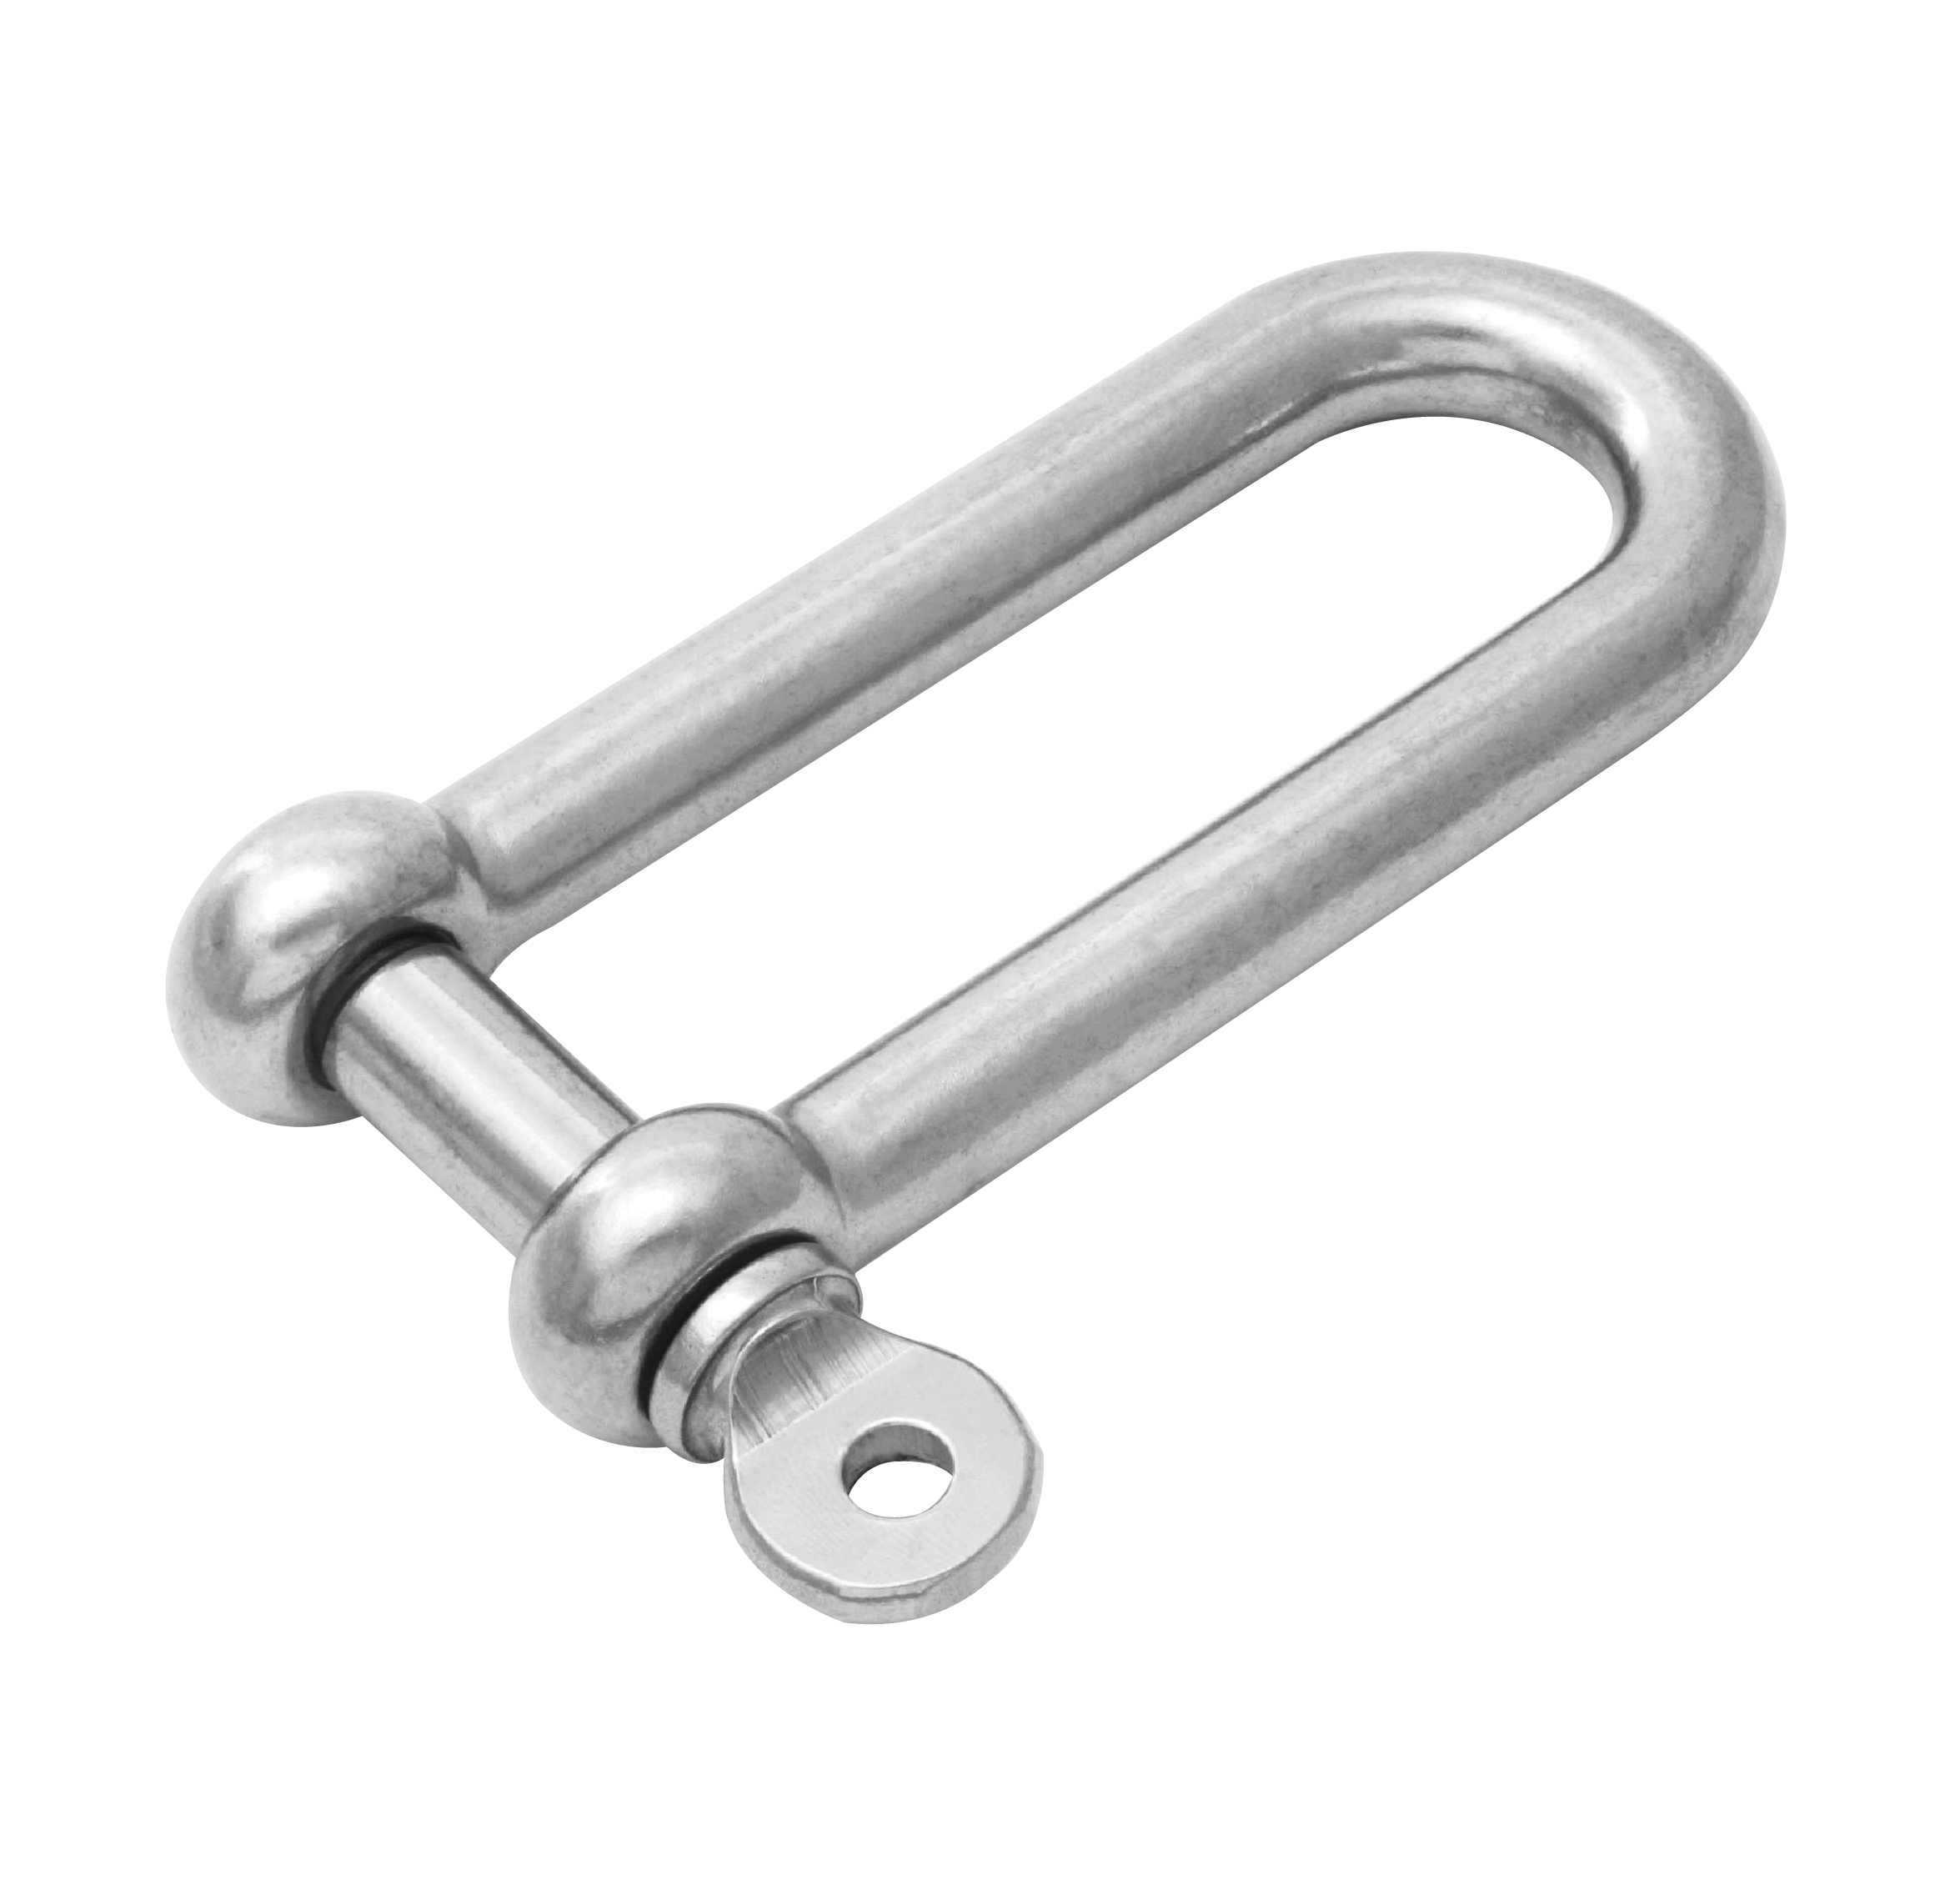 Long D-shackle (collared pin)